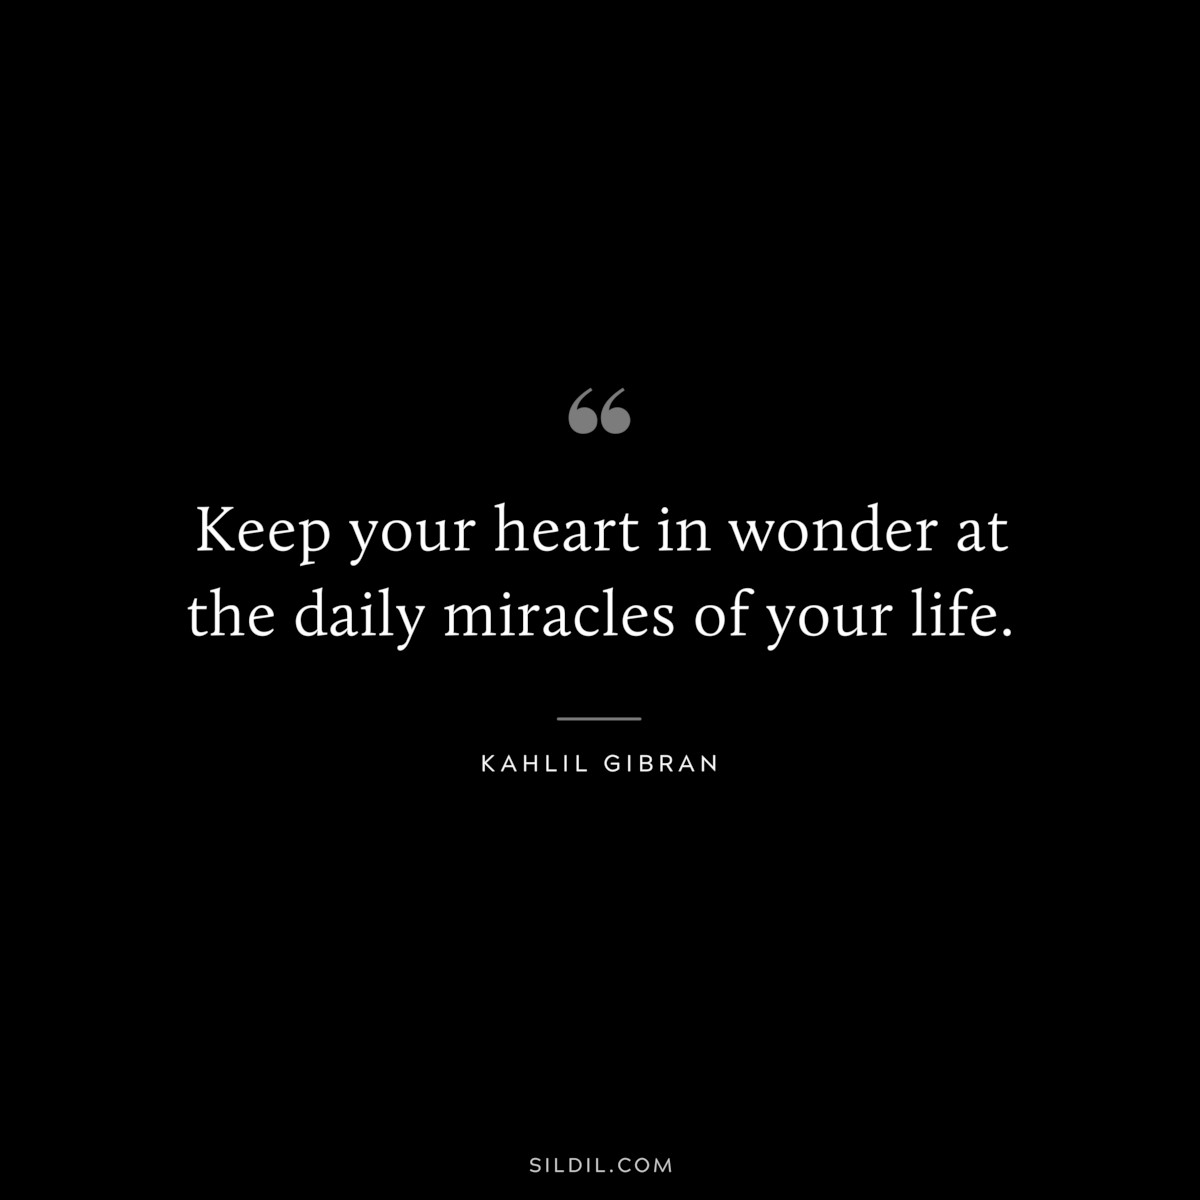 Keep your heart in wonder at the daily miracles of your life. ― Kahlil Gibran